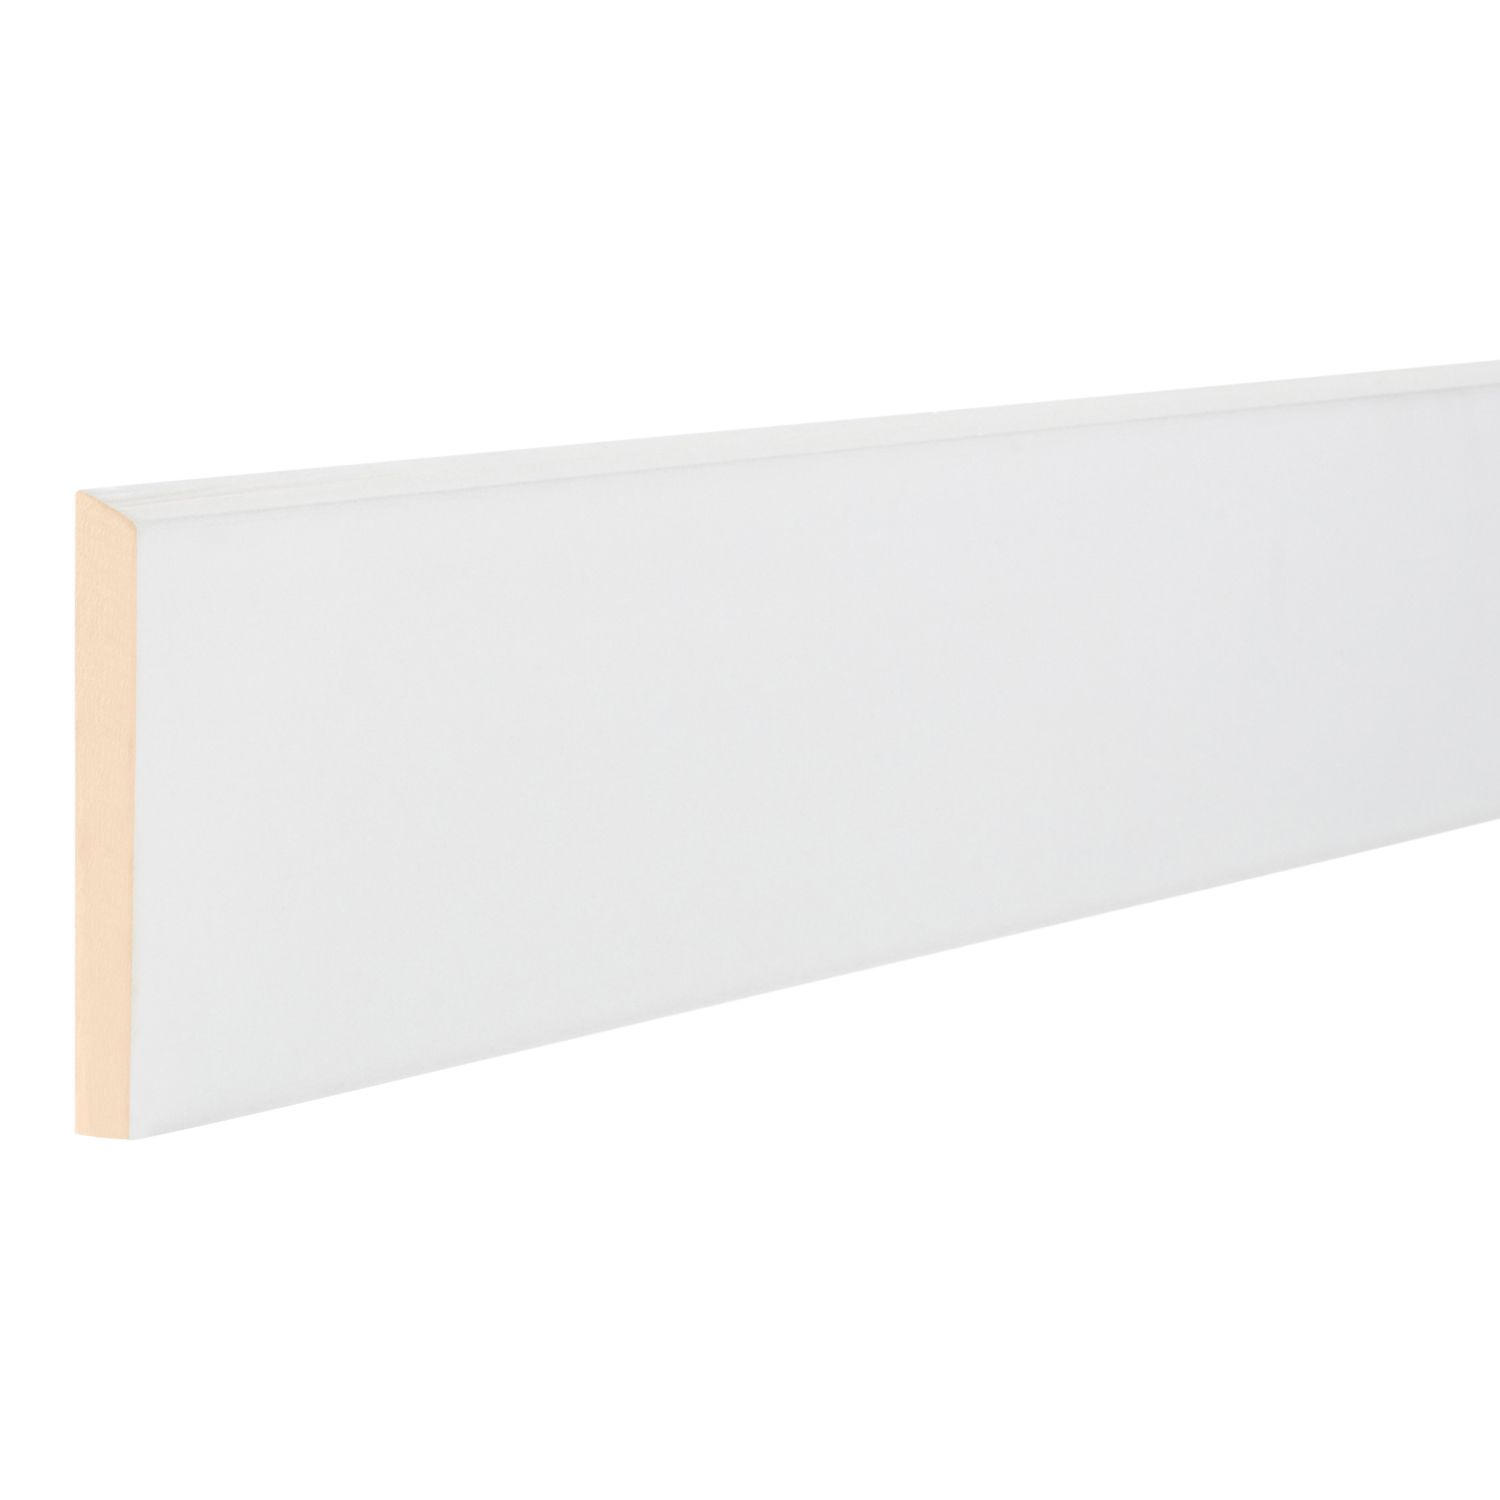 12mm  Single Bevel MDF  Primed Architraves (price per lineal metre)